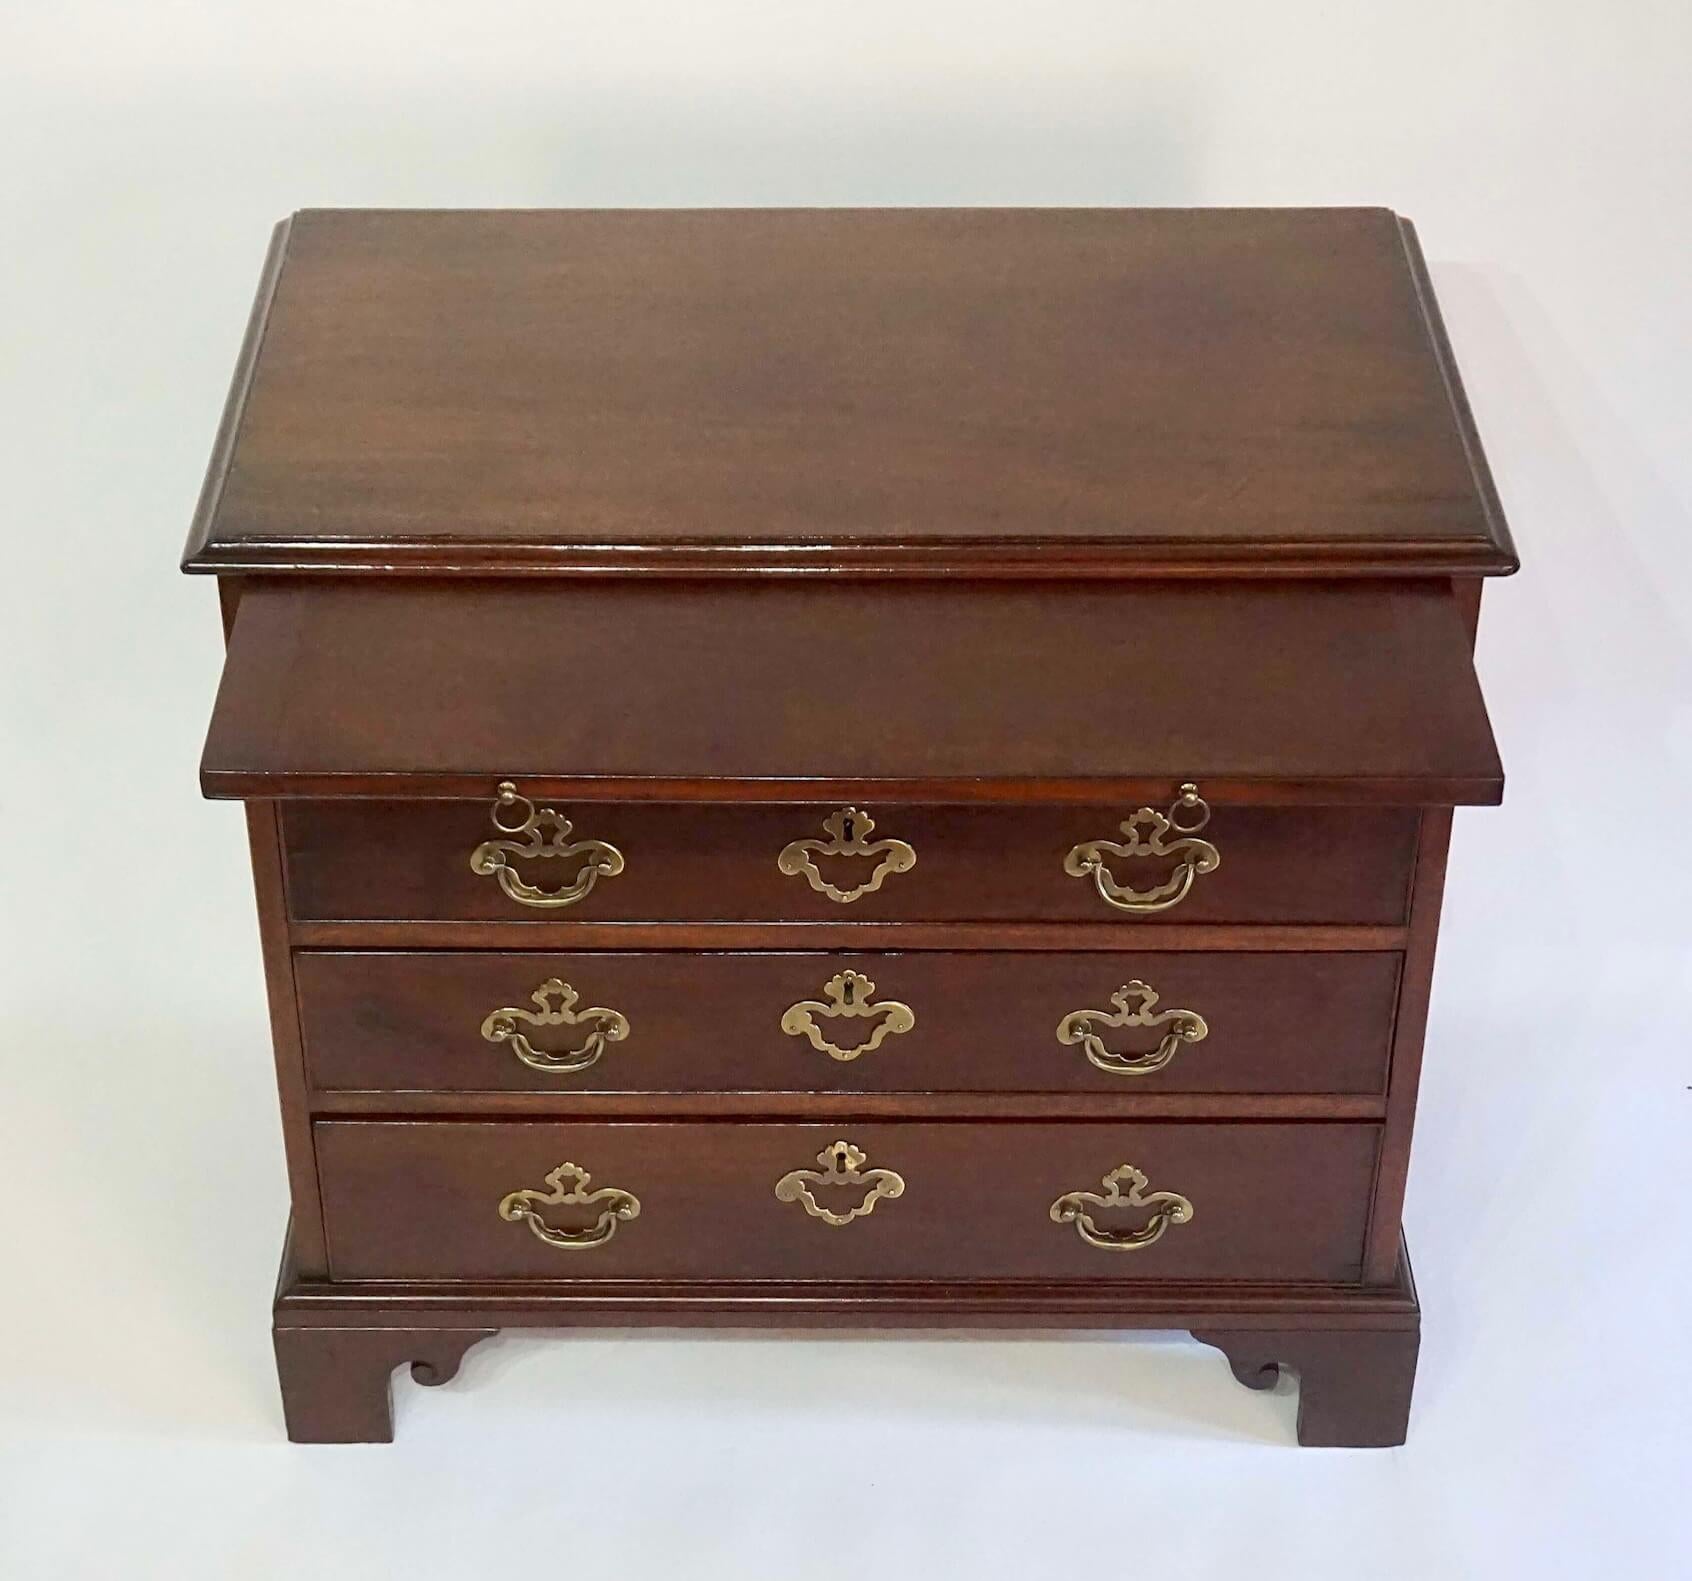 English Georgian Mahogany Bachelor's Chest or Petite Commode, circa 1760 In Good Condition For Sale In Kinderhook, NY